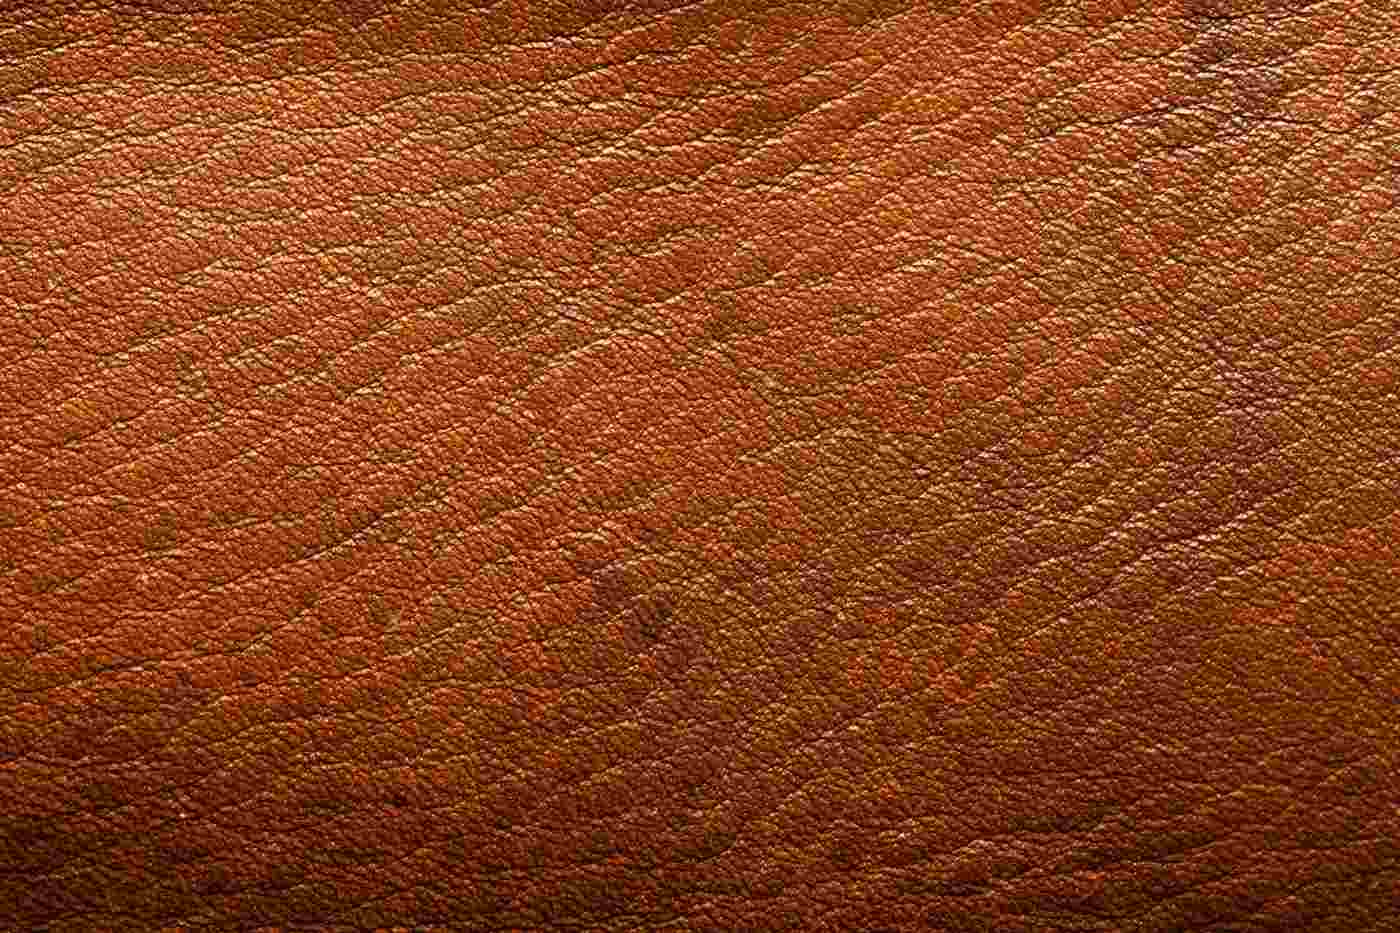 Smooth leather can be open or covered and stained with Anilin